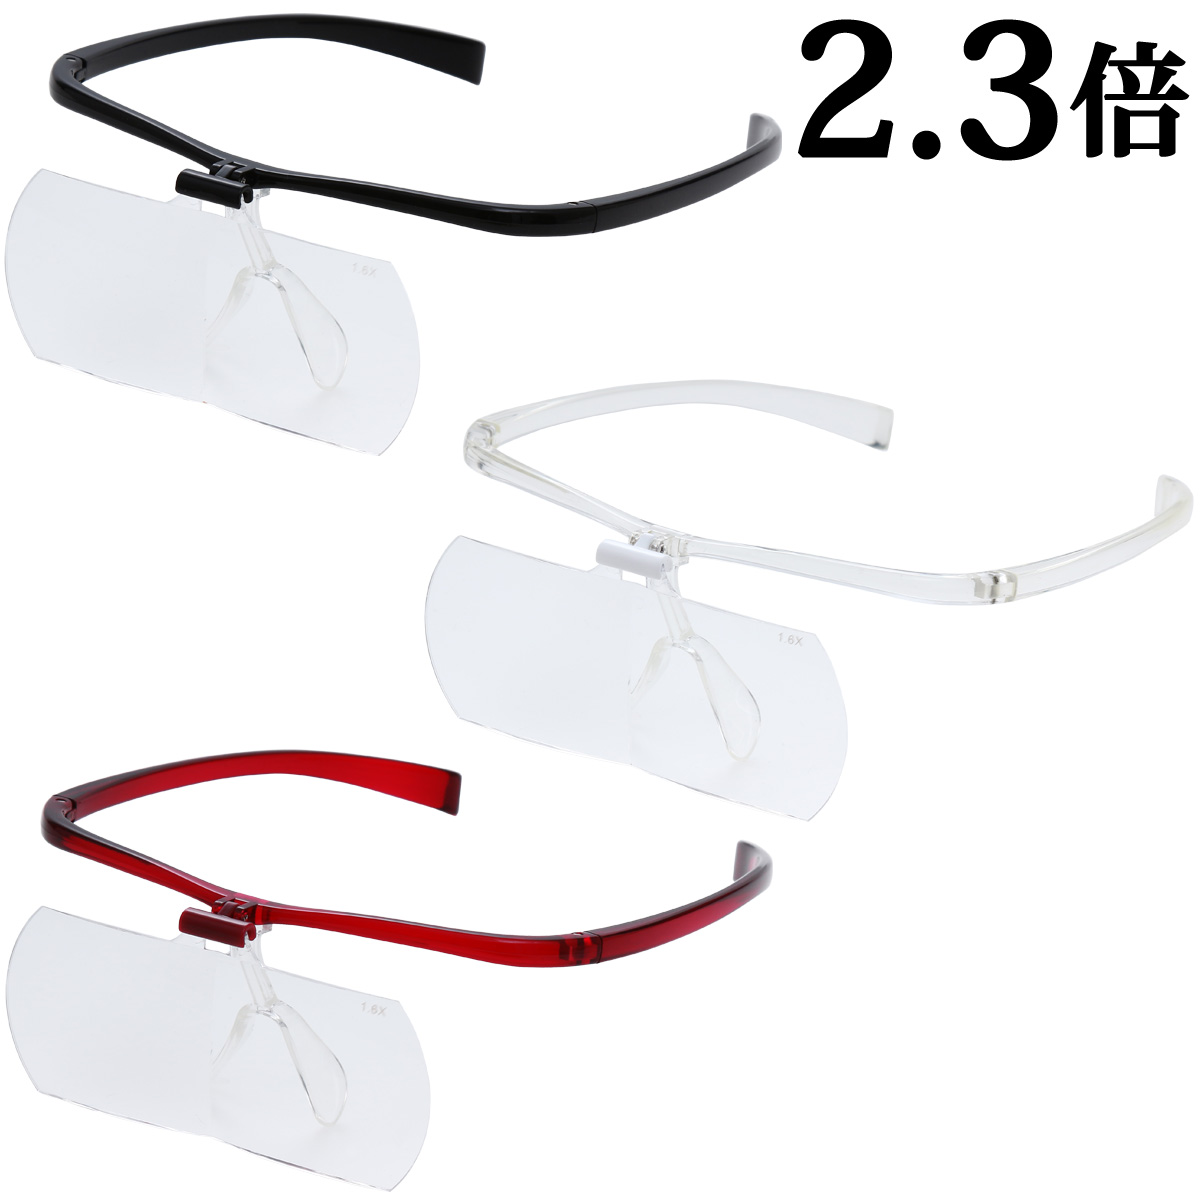 Binocular Glasses Loupe Glasses Type 2.3 times HF - 60F Clear Loupe Ikeda Lens from the Top of Spectacular Glasses